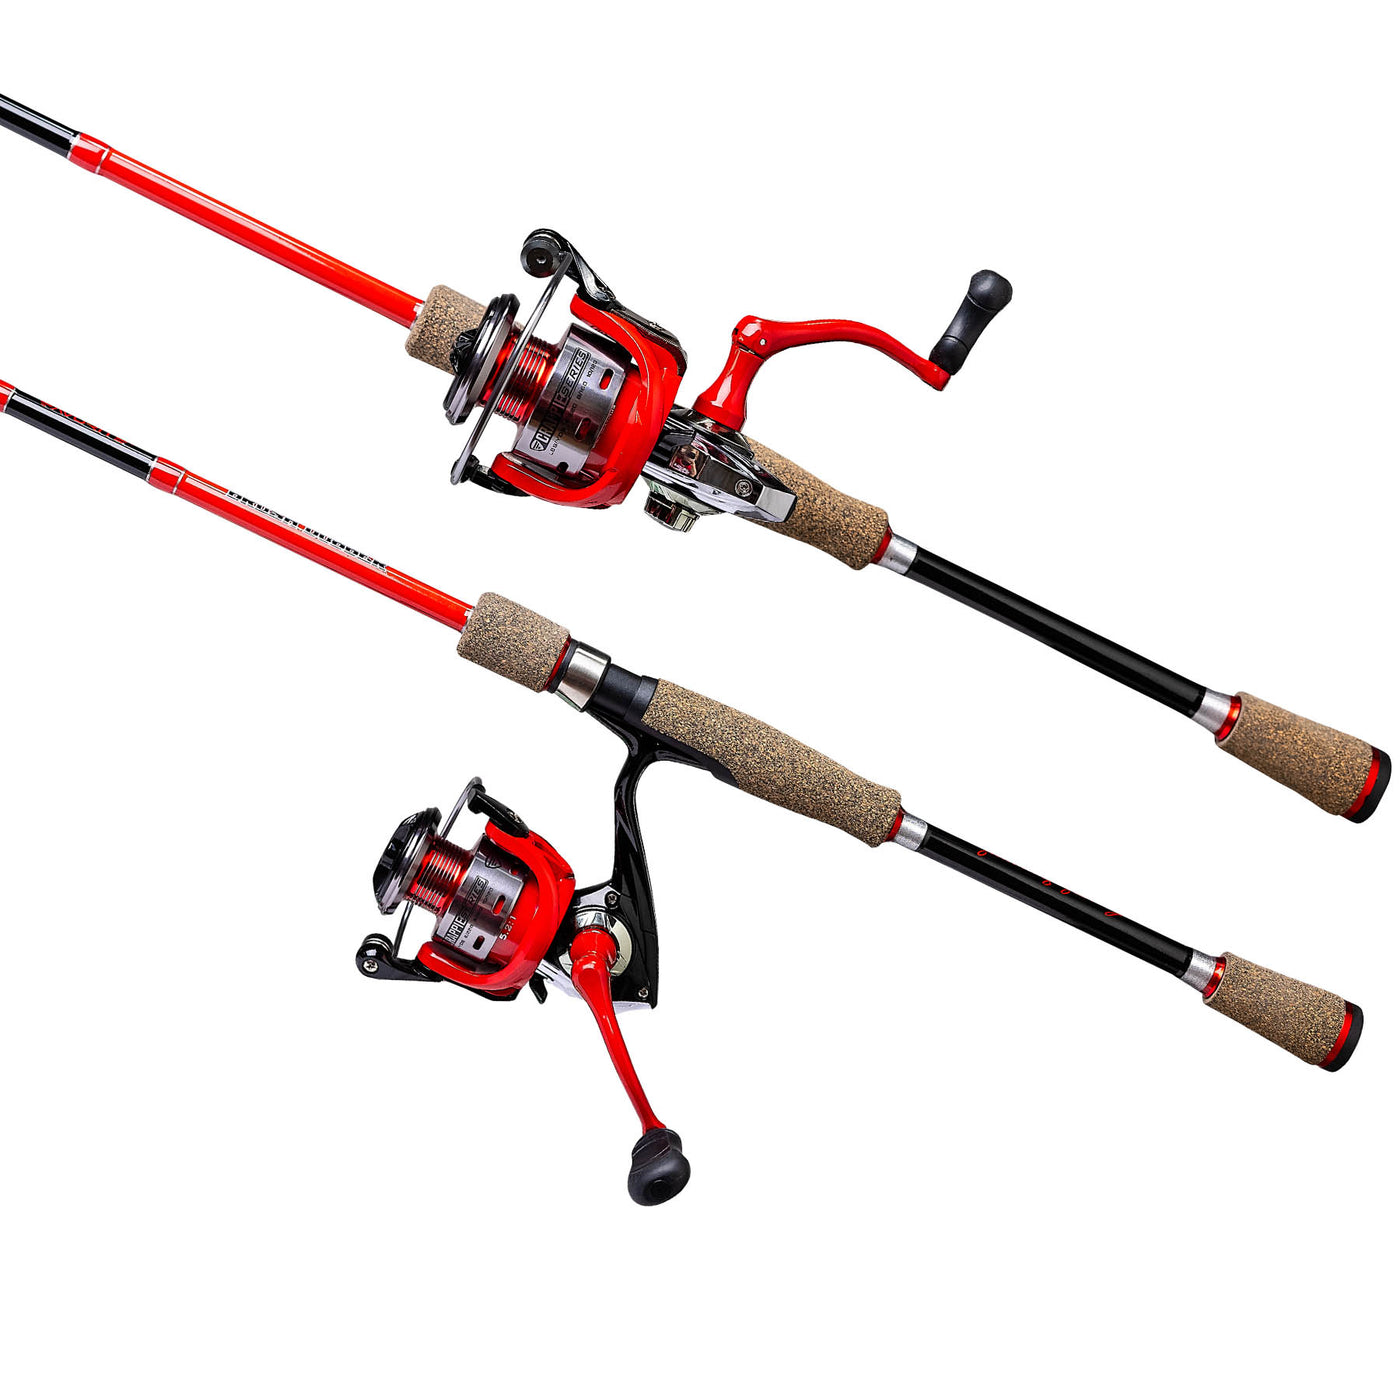 Crappie Rod And Reel Combo  Rod And Reel Combo For Crappie Fishing